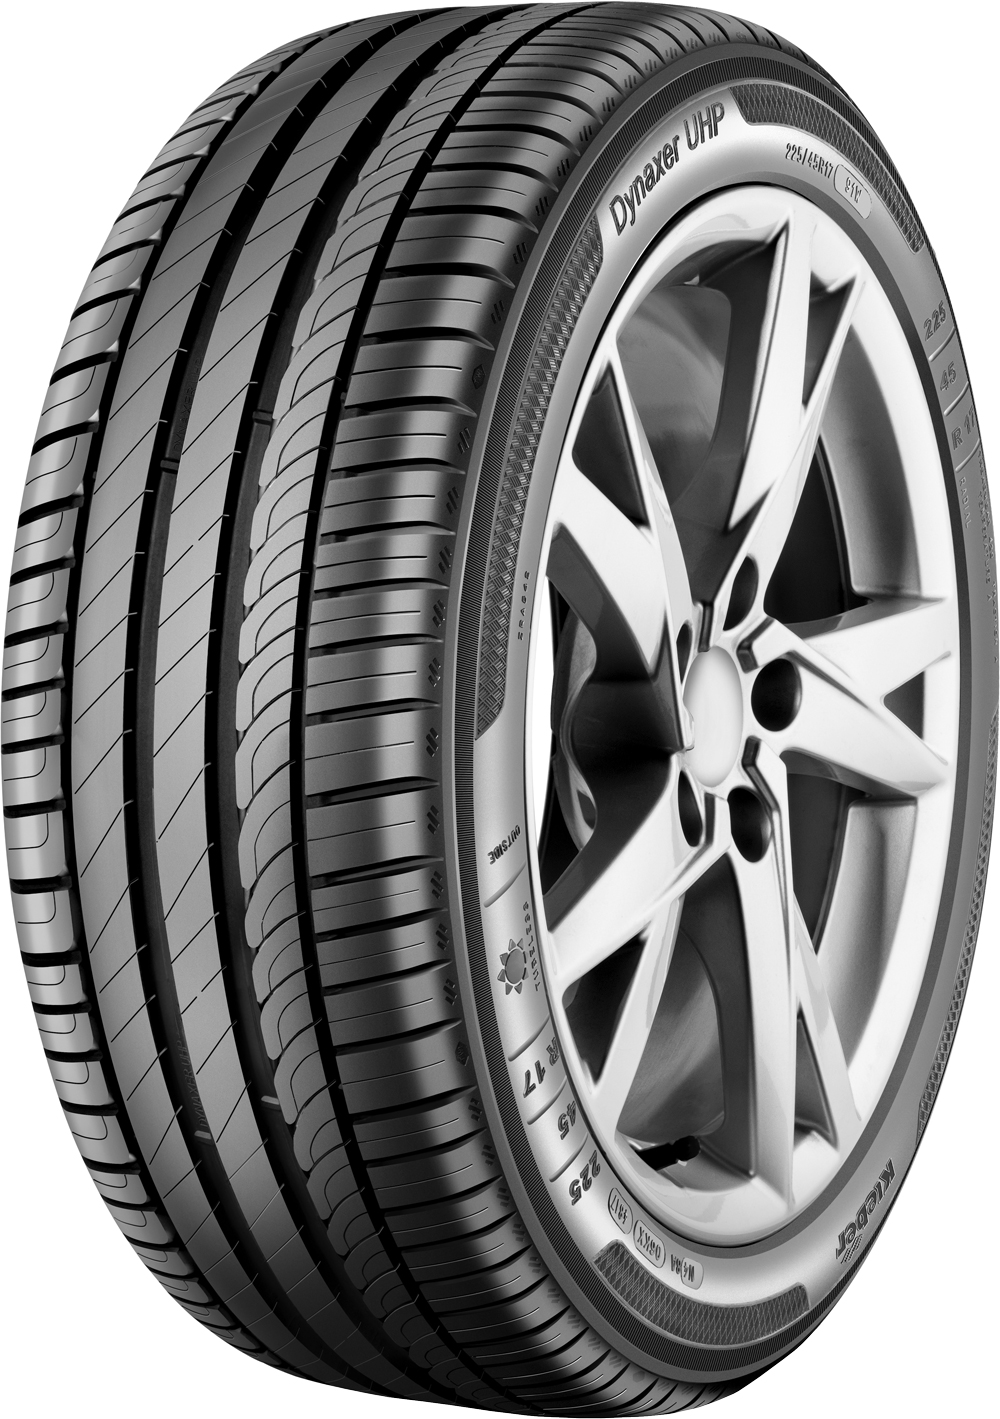 Anvelope auto KLEBER DYNUHP 225/45 R17 91Y